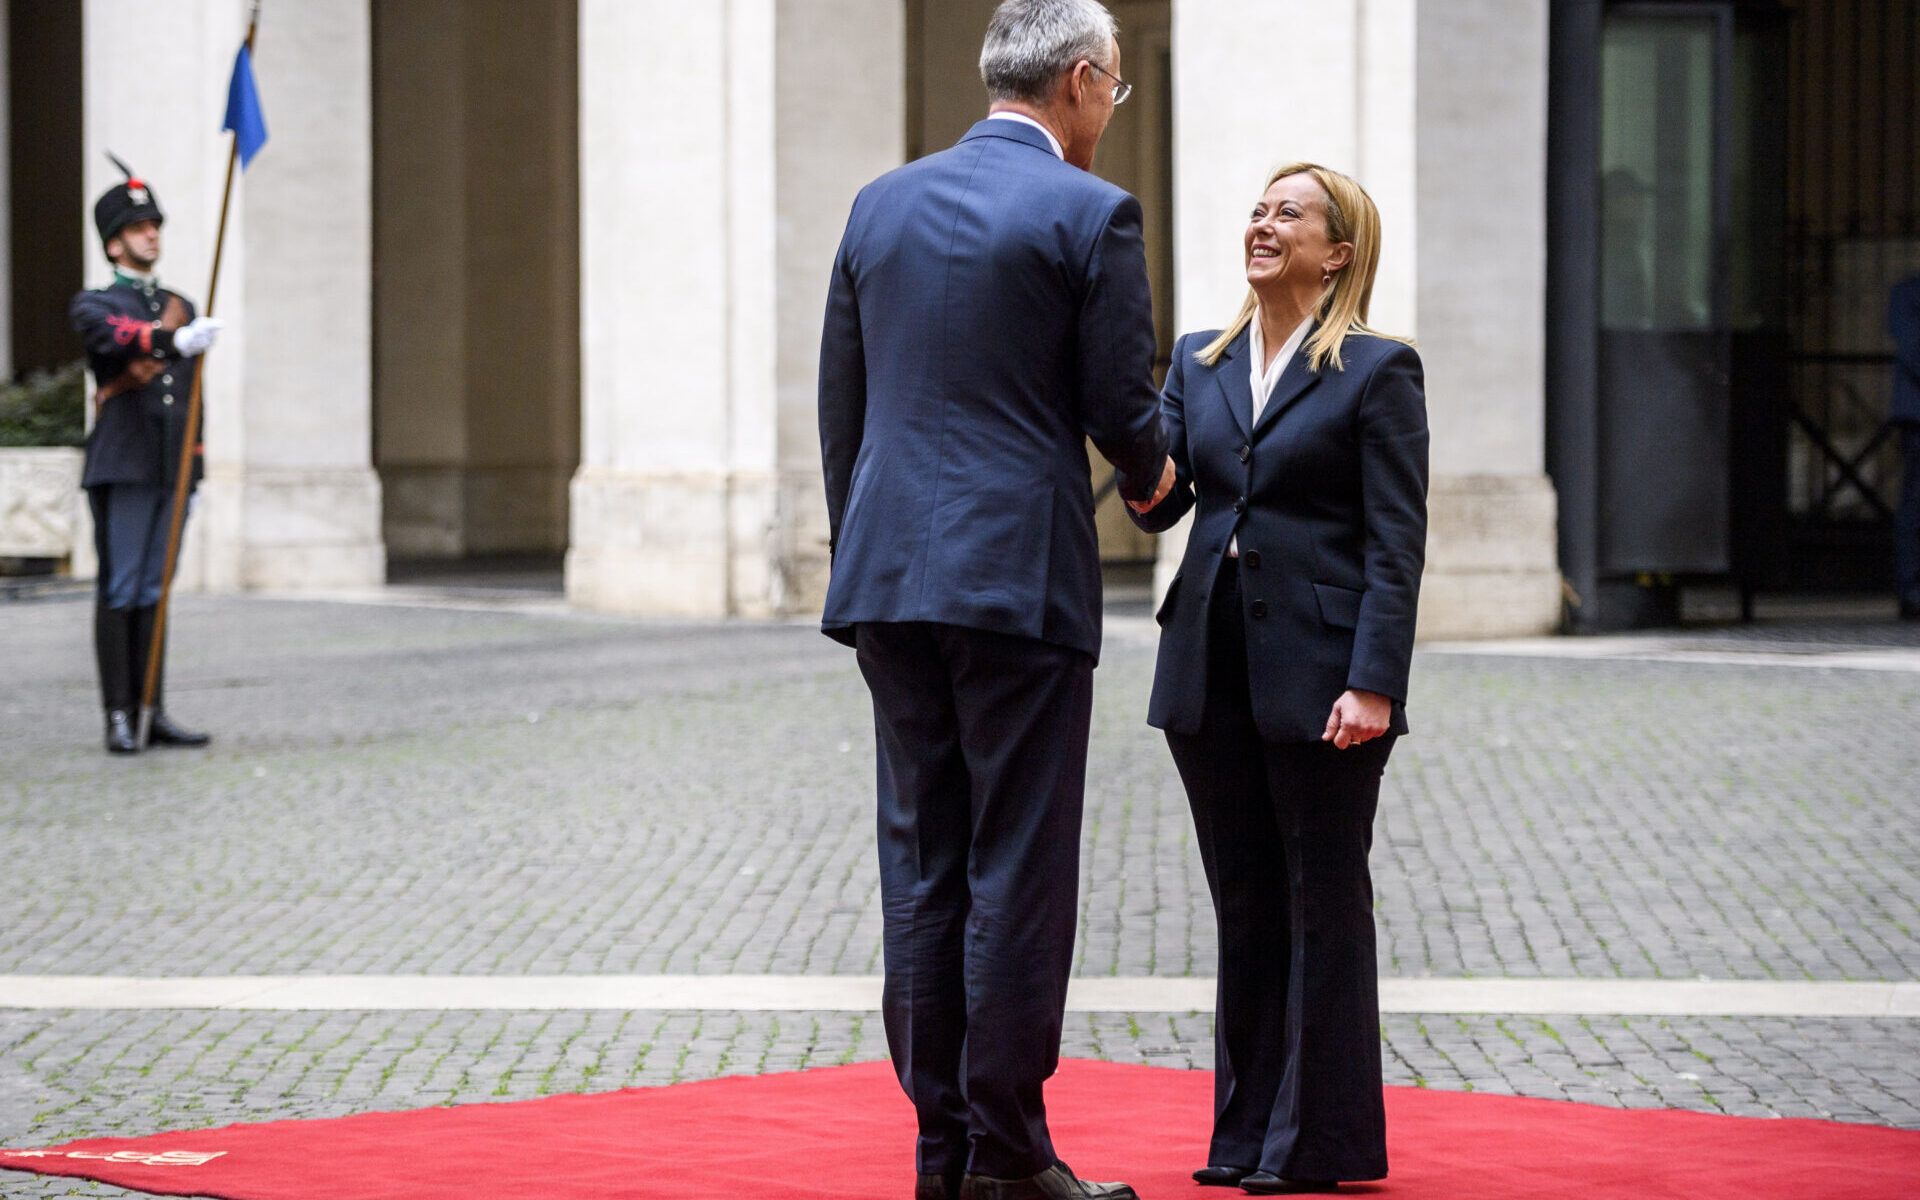 ROME, ITALY - NOVEMBER 10: Italian Prime Minister Giorgia Meloni and NATO Secretary Jens Stoltenberg shake hands before their meeting at Palazzo Chigi, on November 10, 2022 in Rome, Italy. Giorgia Meloni has repeatedly stressed her new government's unconditional support for NATO and for Western sanctions against Russia and military aid for Ukraine in its war against Moscow. (Photo by Antonio Masiello/Getty Images)